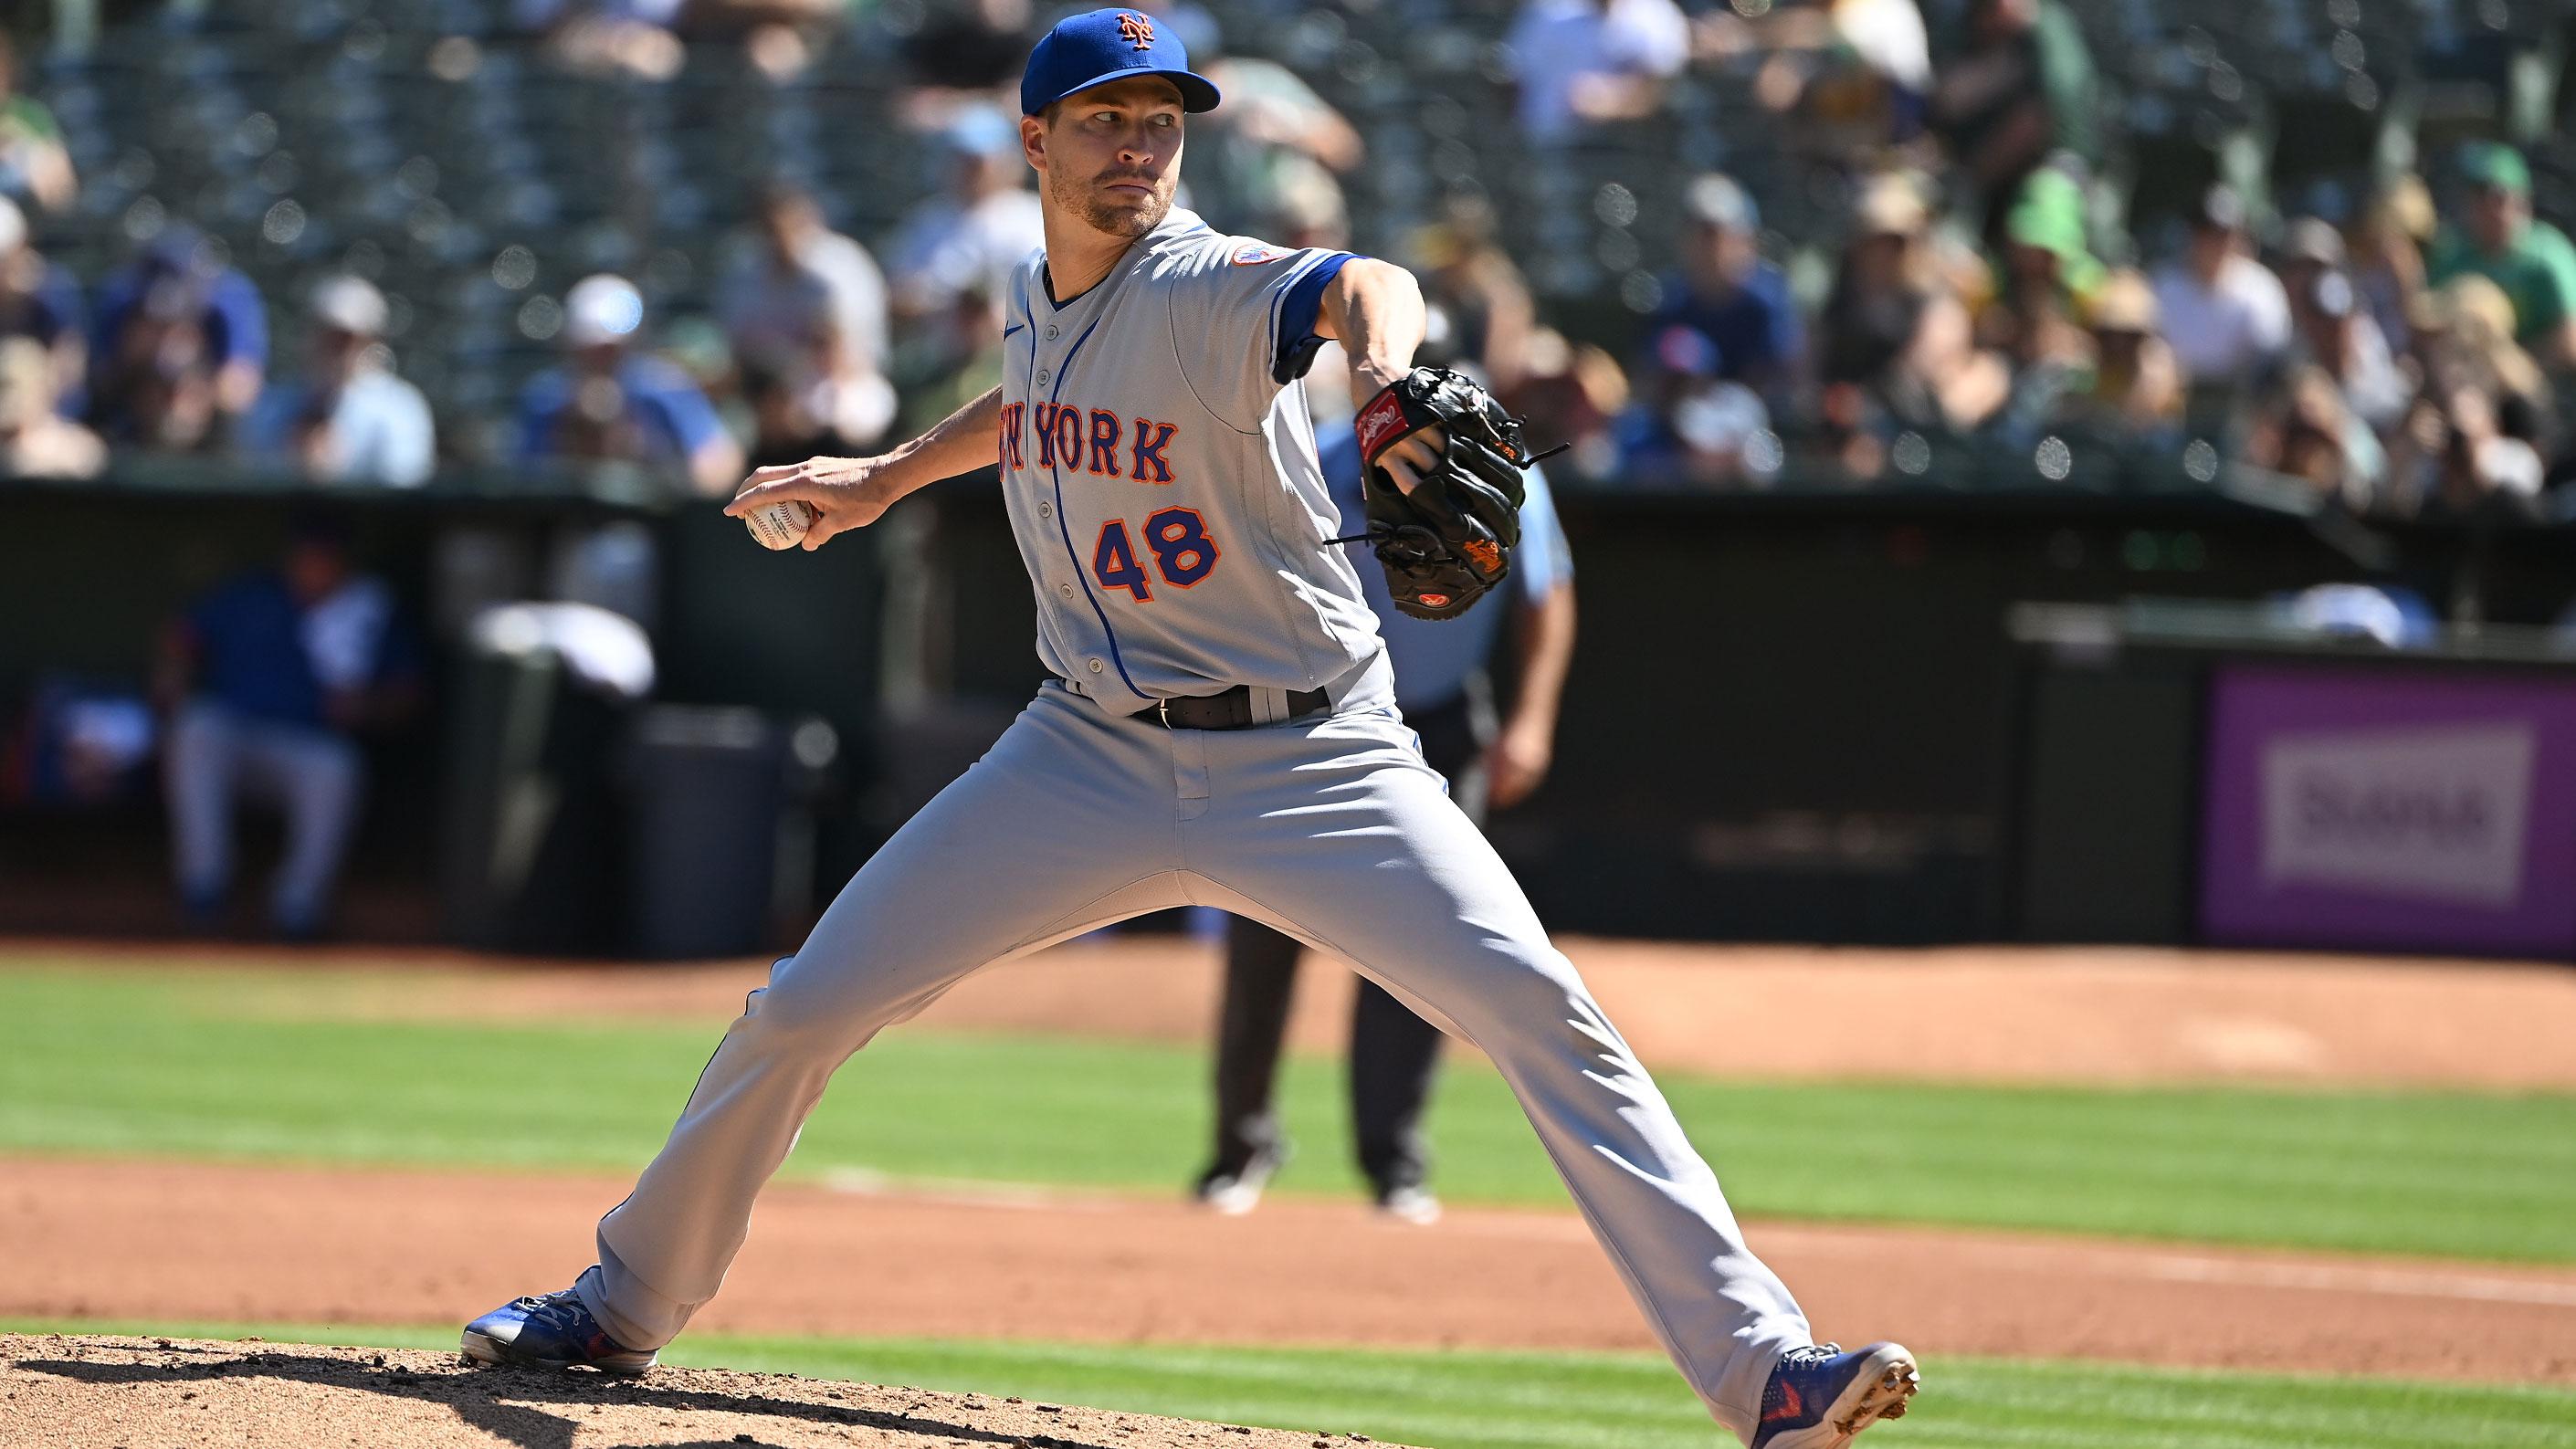 Sep 24, 2022; Oakland, California, USA; New York Mets starting pitcher Jacob deGrom (48) throws a pitch against the Oakland Athletics during the first inning at RingCentral Coliseum. / Robert Edwards-USA TODAY Sports